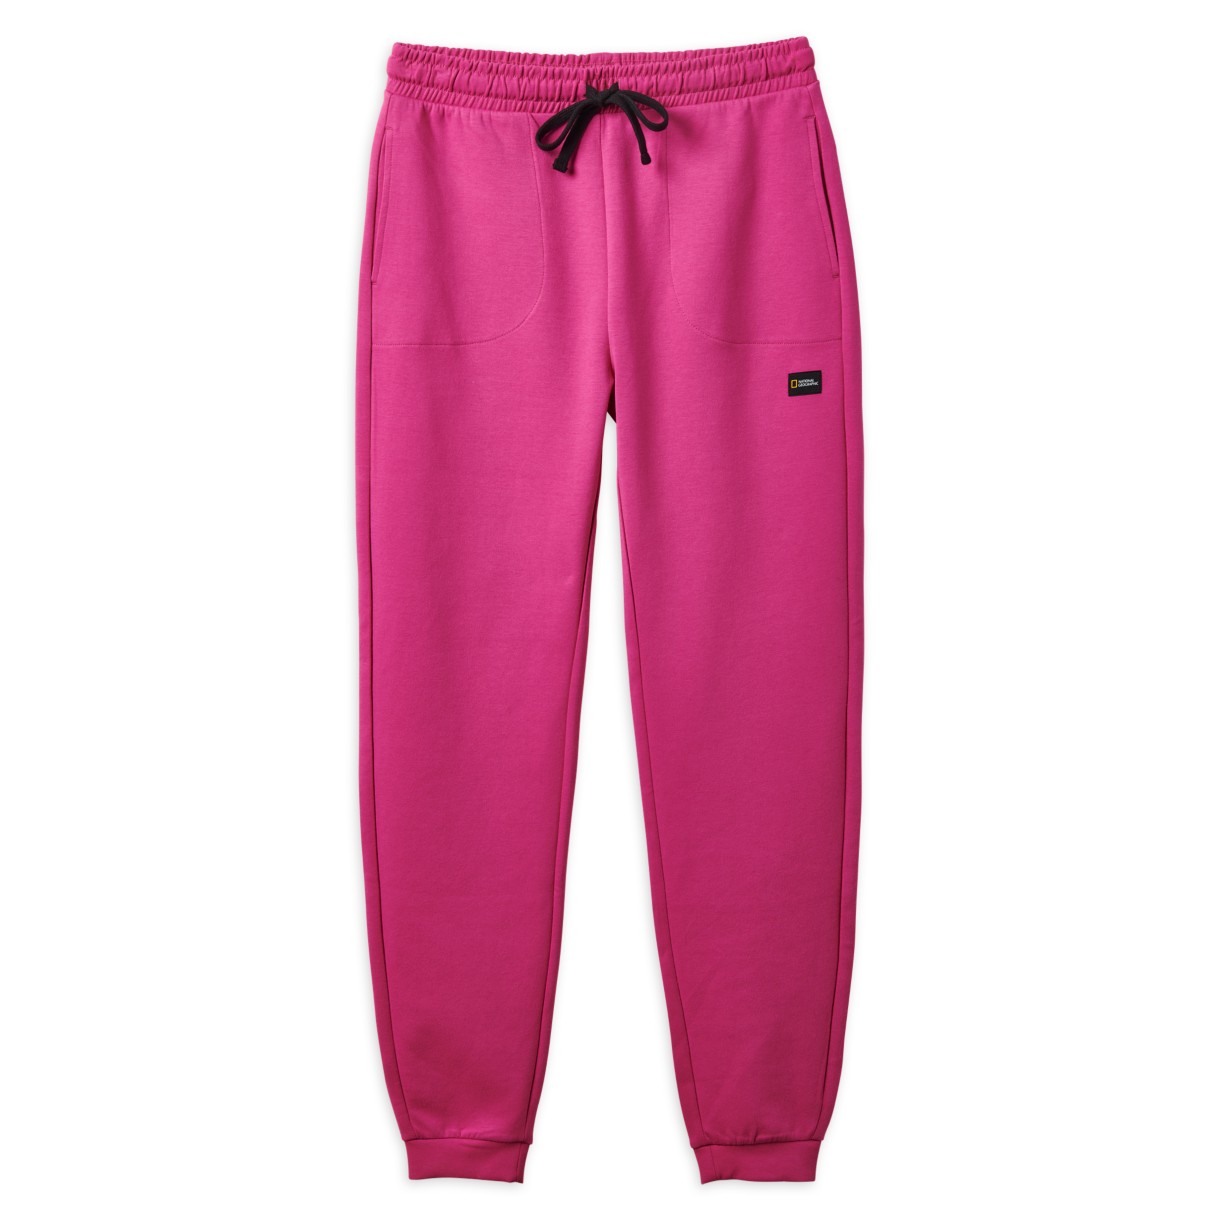 National Geographic Jogger Pants for Women – Pink